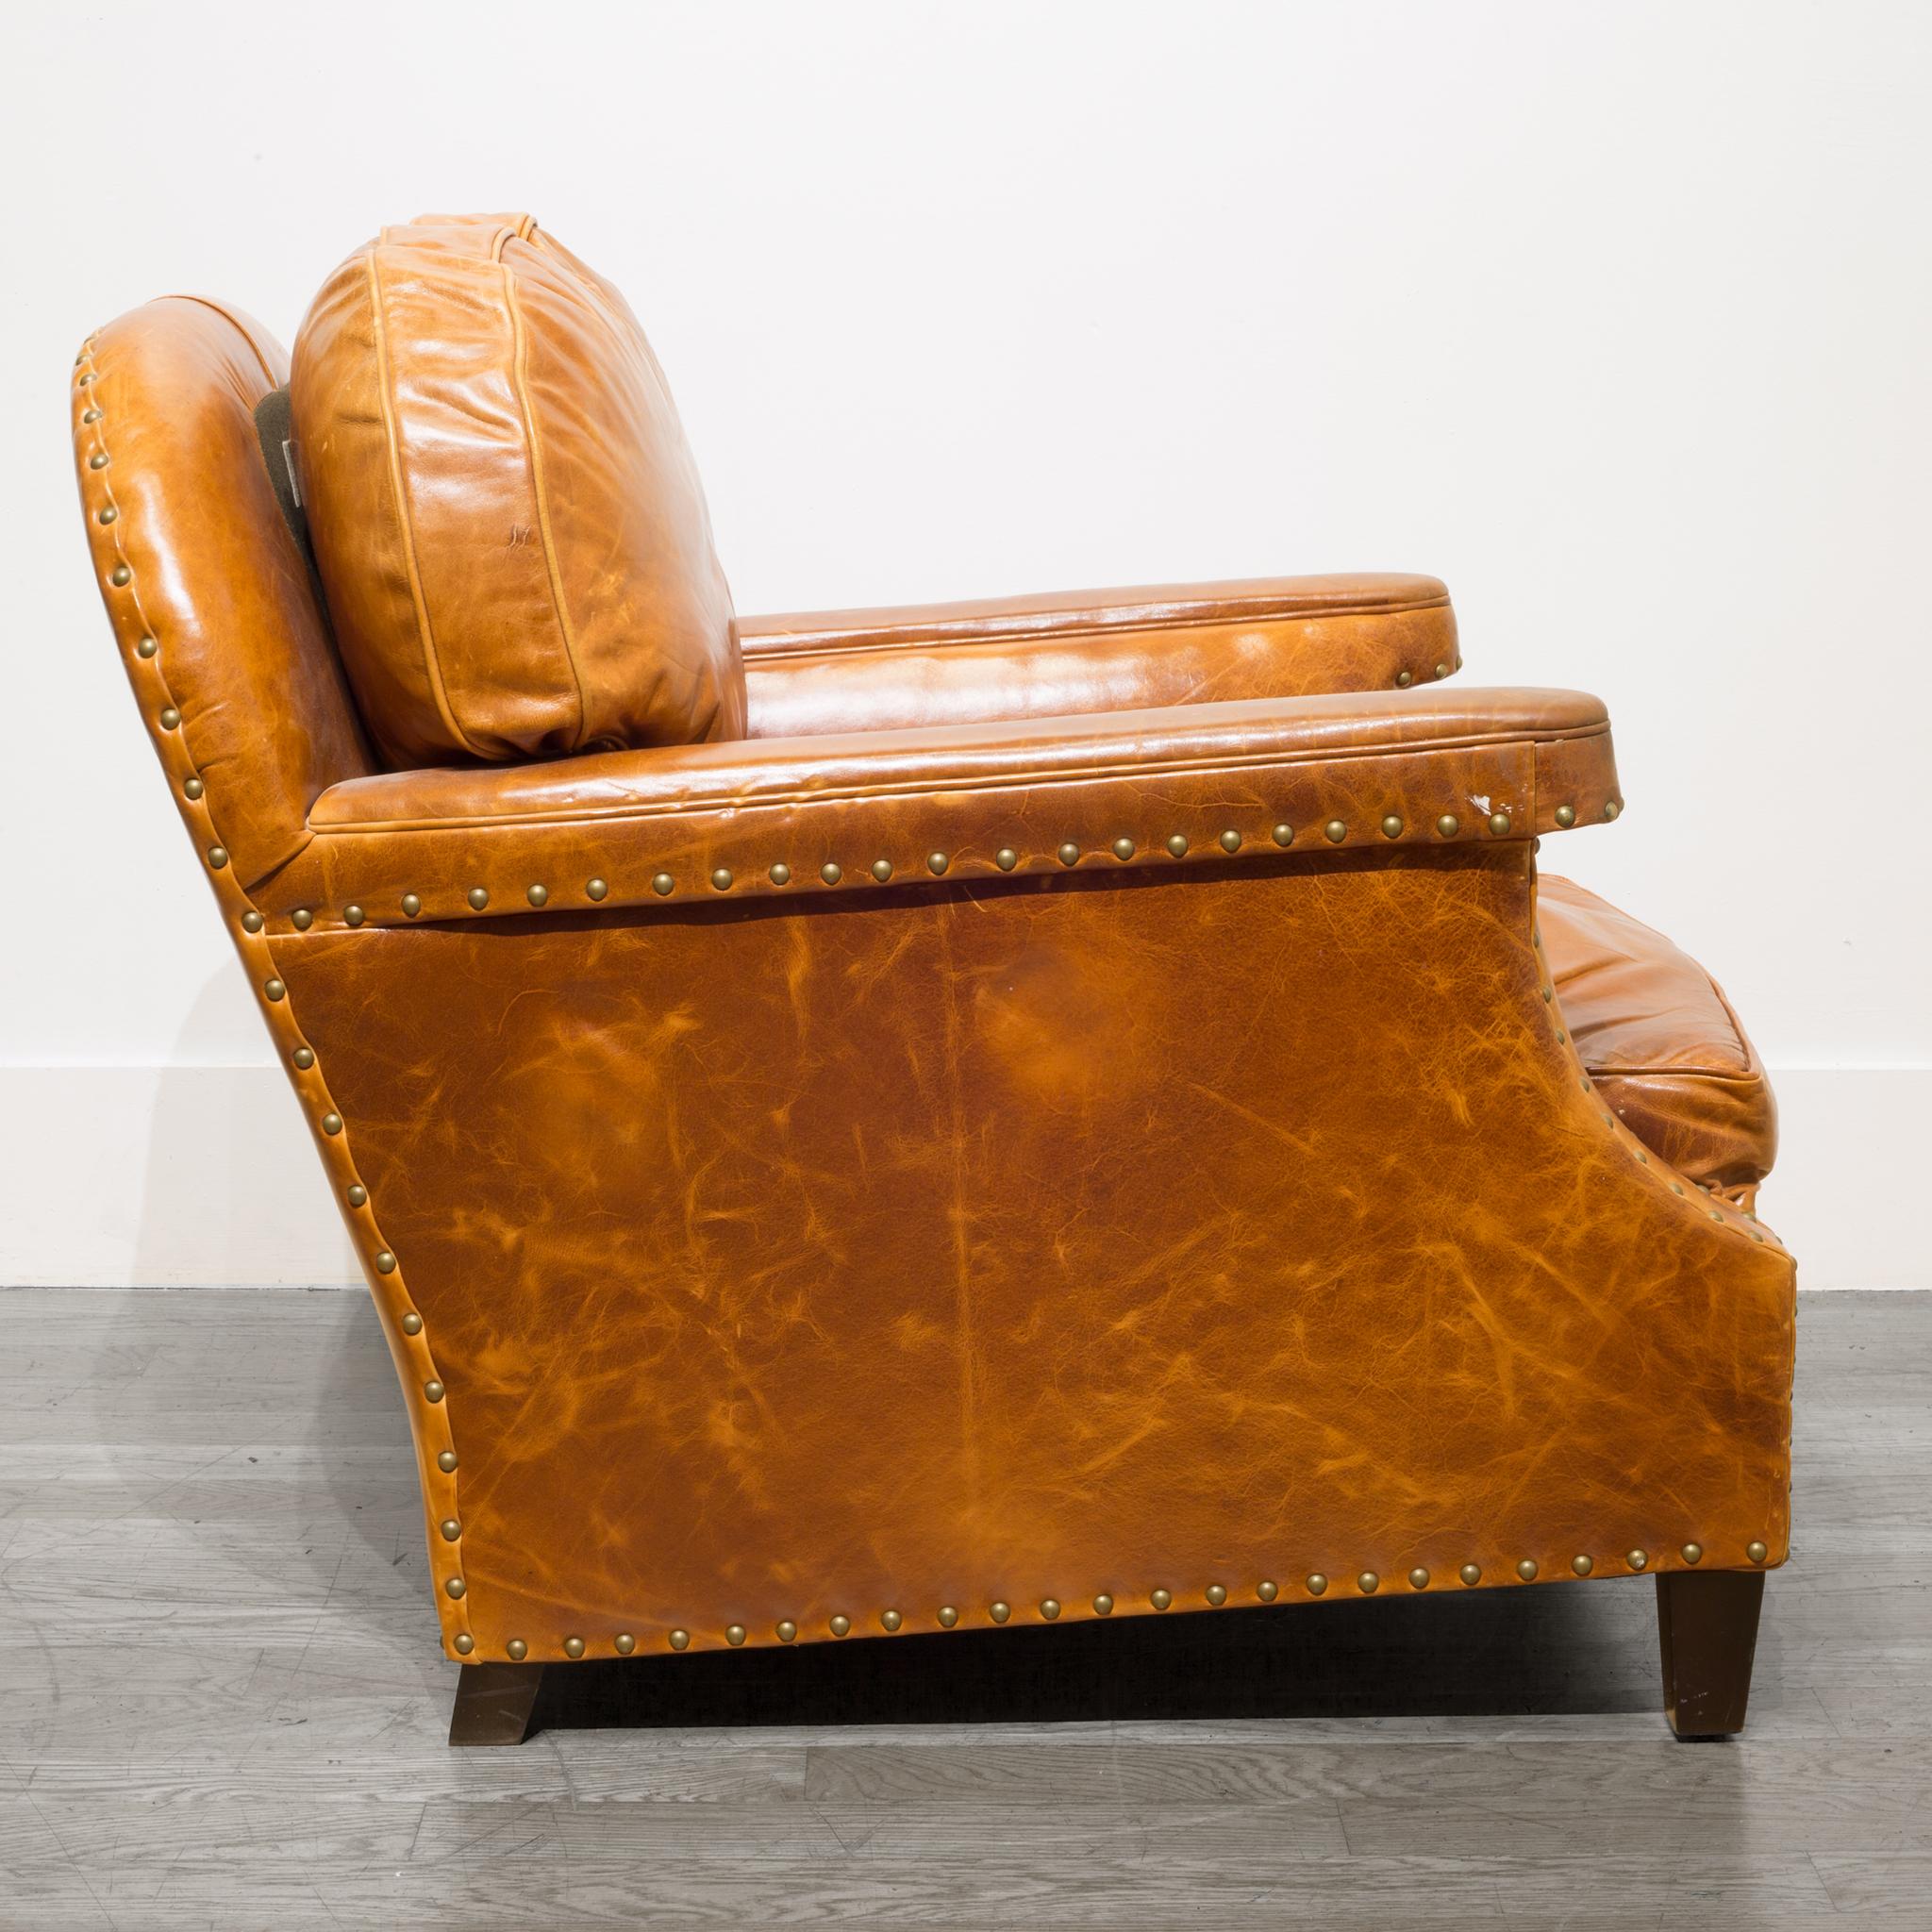 Brass Pair of William-Sonoma Riveted Leather Club Chairs, circa 2007